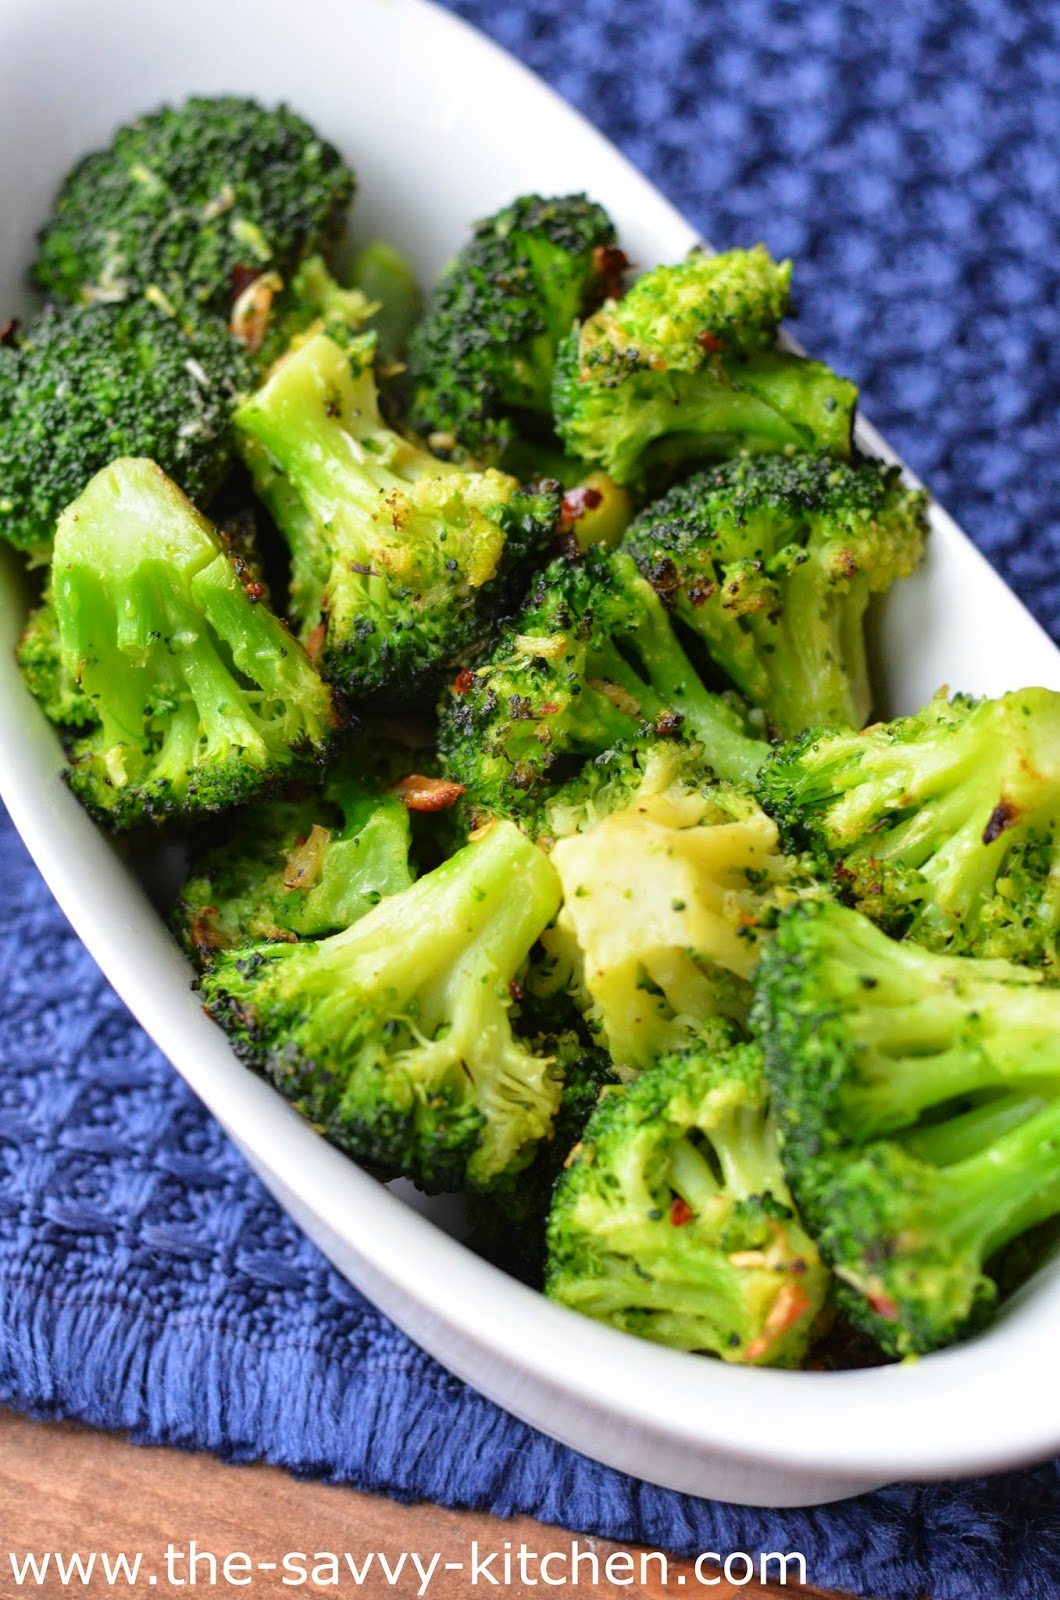 The Savvy Kitchen: Spicy Roasted Broccoli and Garlic